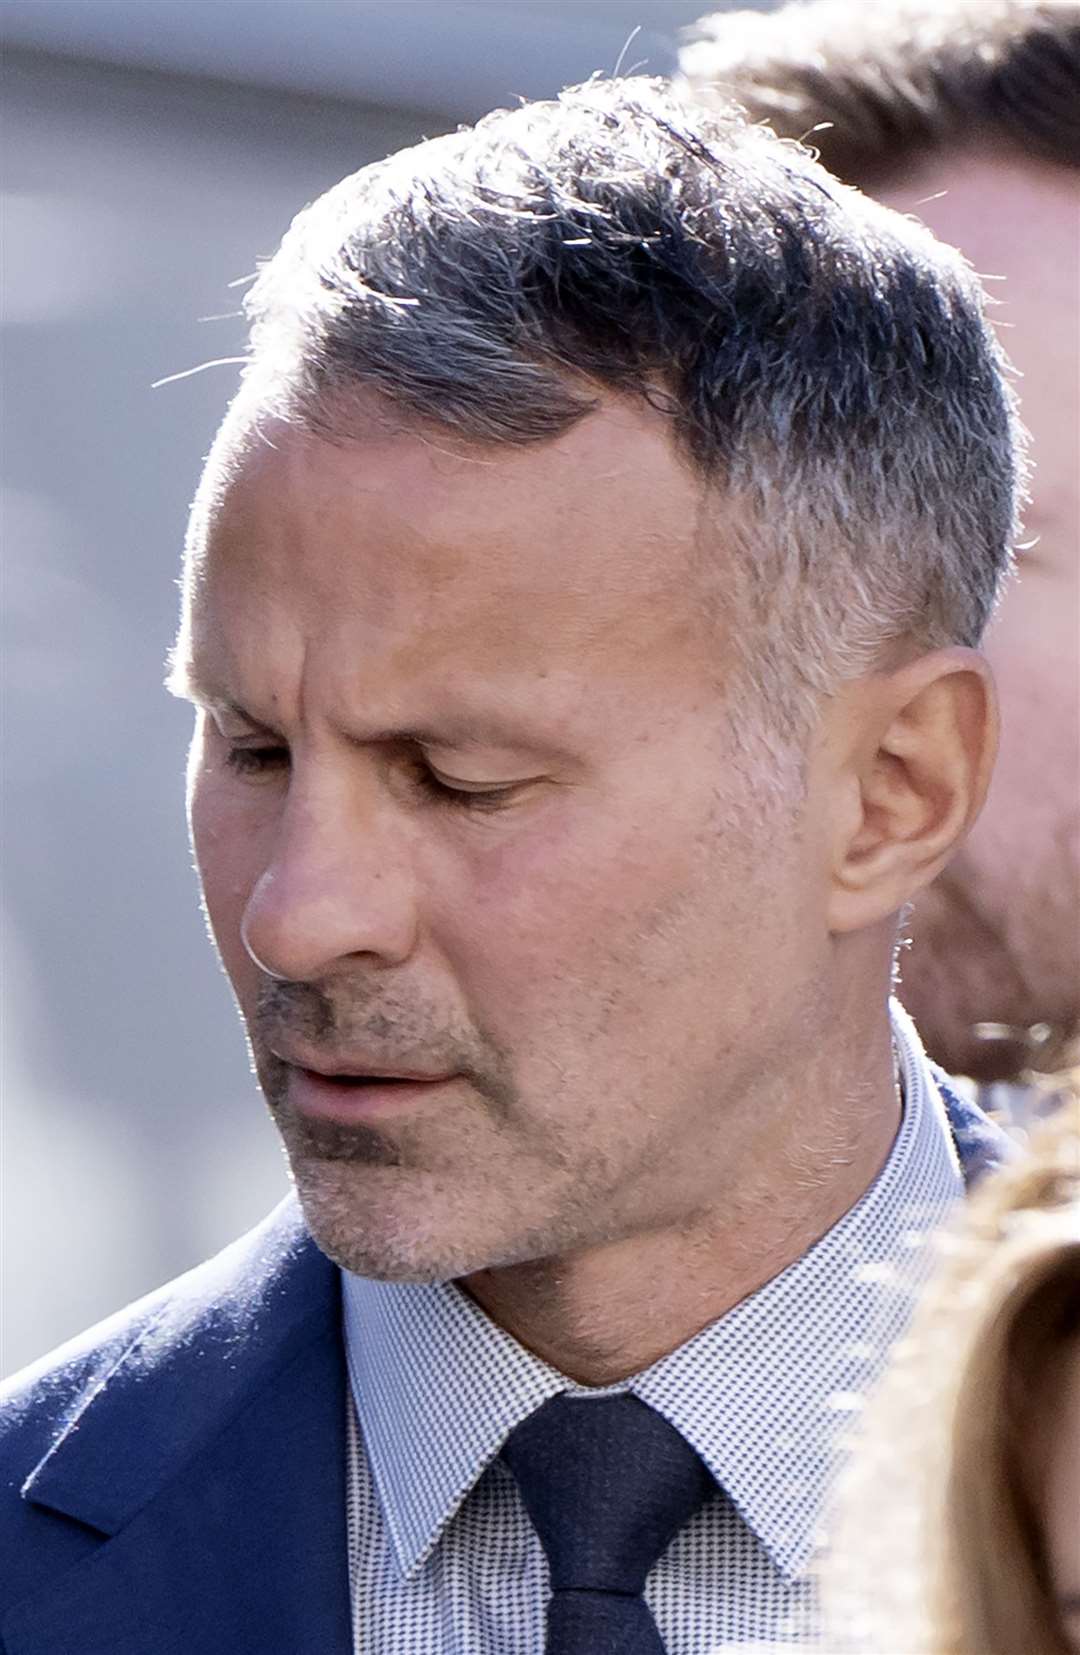 Former Manchester United footballer Ryan Giggs arrives at Manchester Crown Court where he is accused of controlling and coercive behaviour against ex-girlfriend Kate Greville (Danny Lawson/PA)